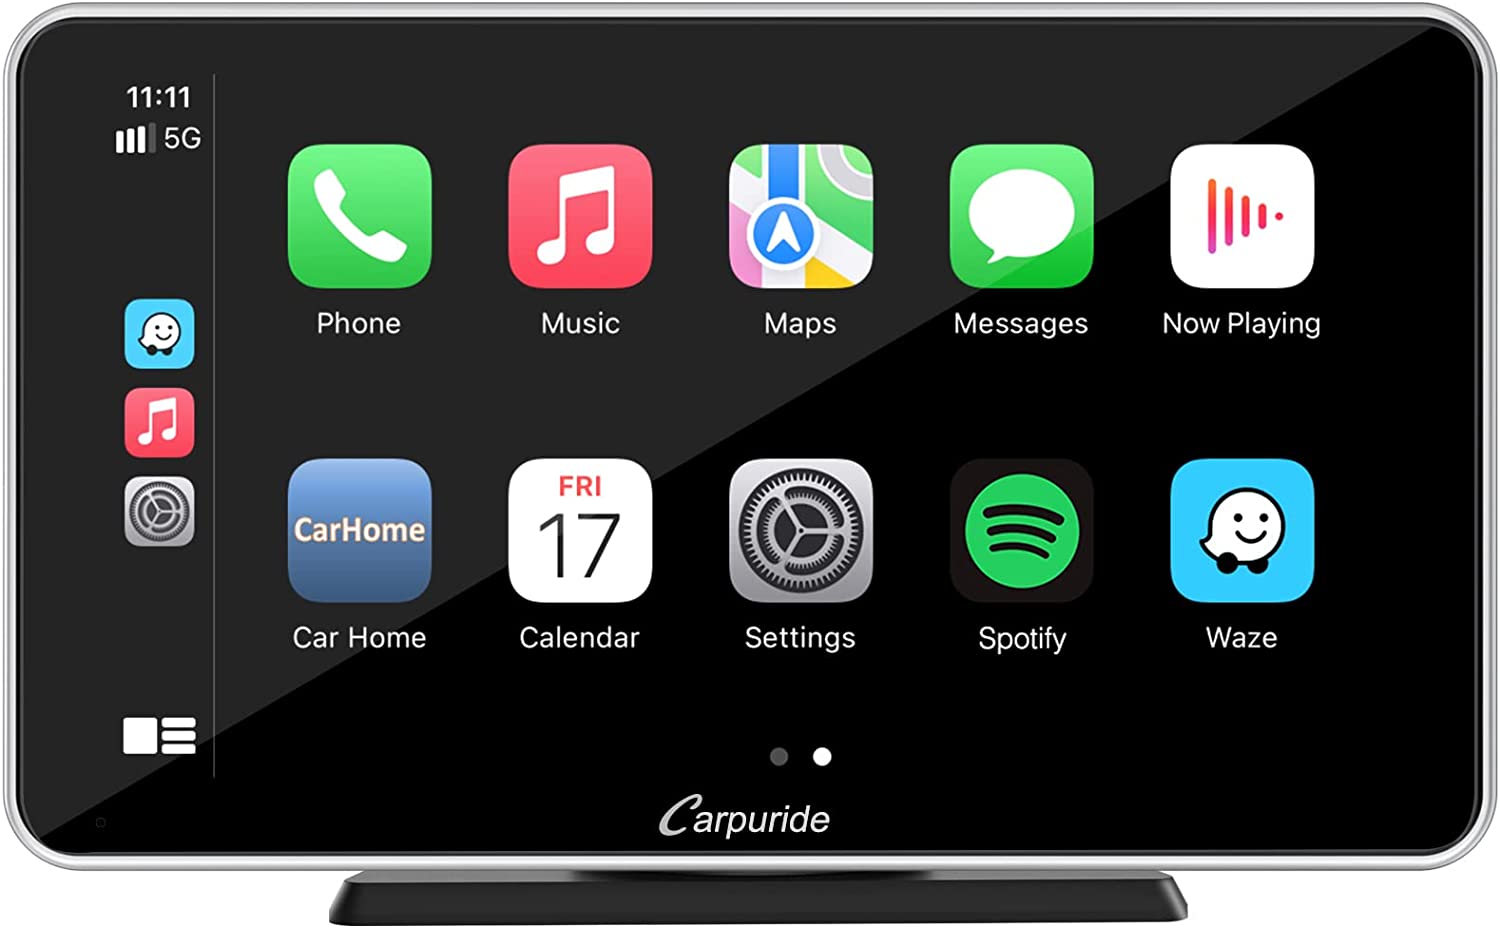  10 Inch Wireless Portable Apple Carplay Screen for Car Plug  in.4k Dash Cam with Android Auto. Portable Car Stereo. Car Play Box Dash  Mount,Driveplay Bluetooth,GPS Navigation,Radio,Airplay : Electronics